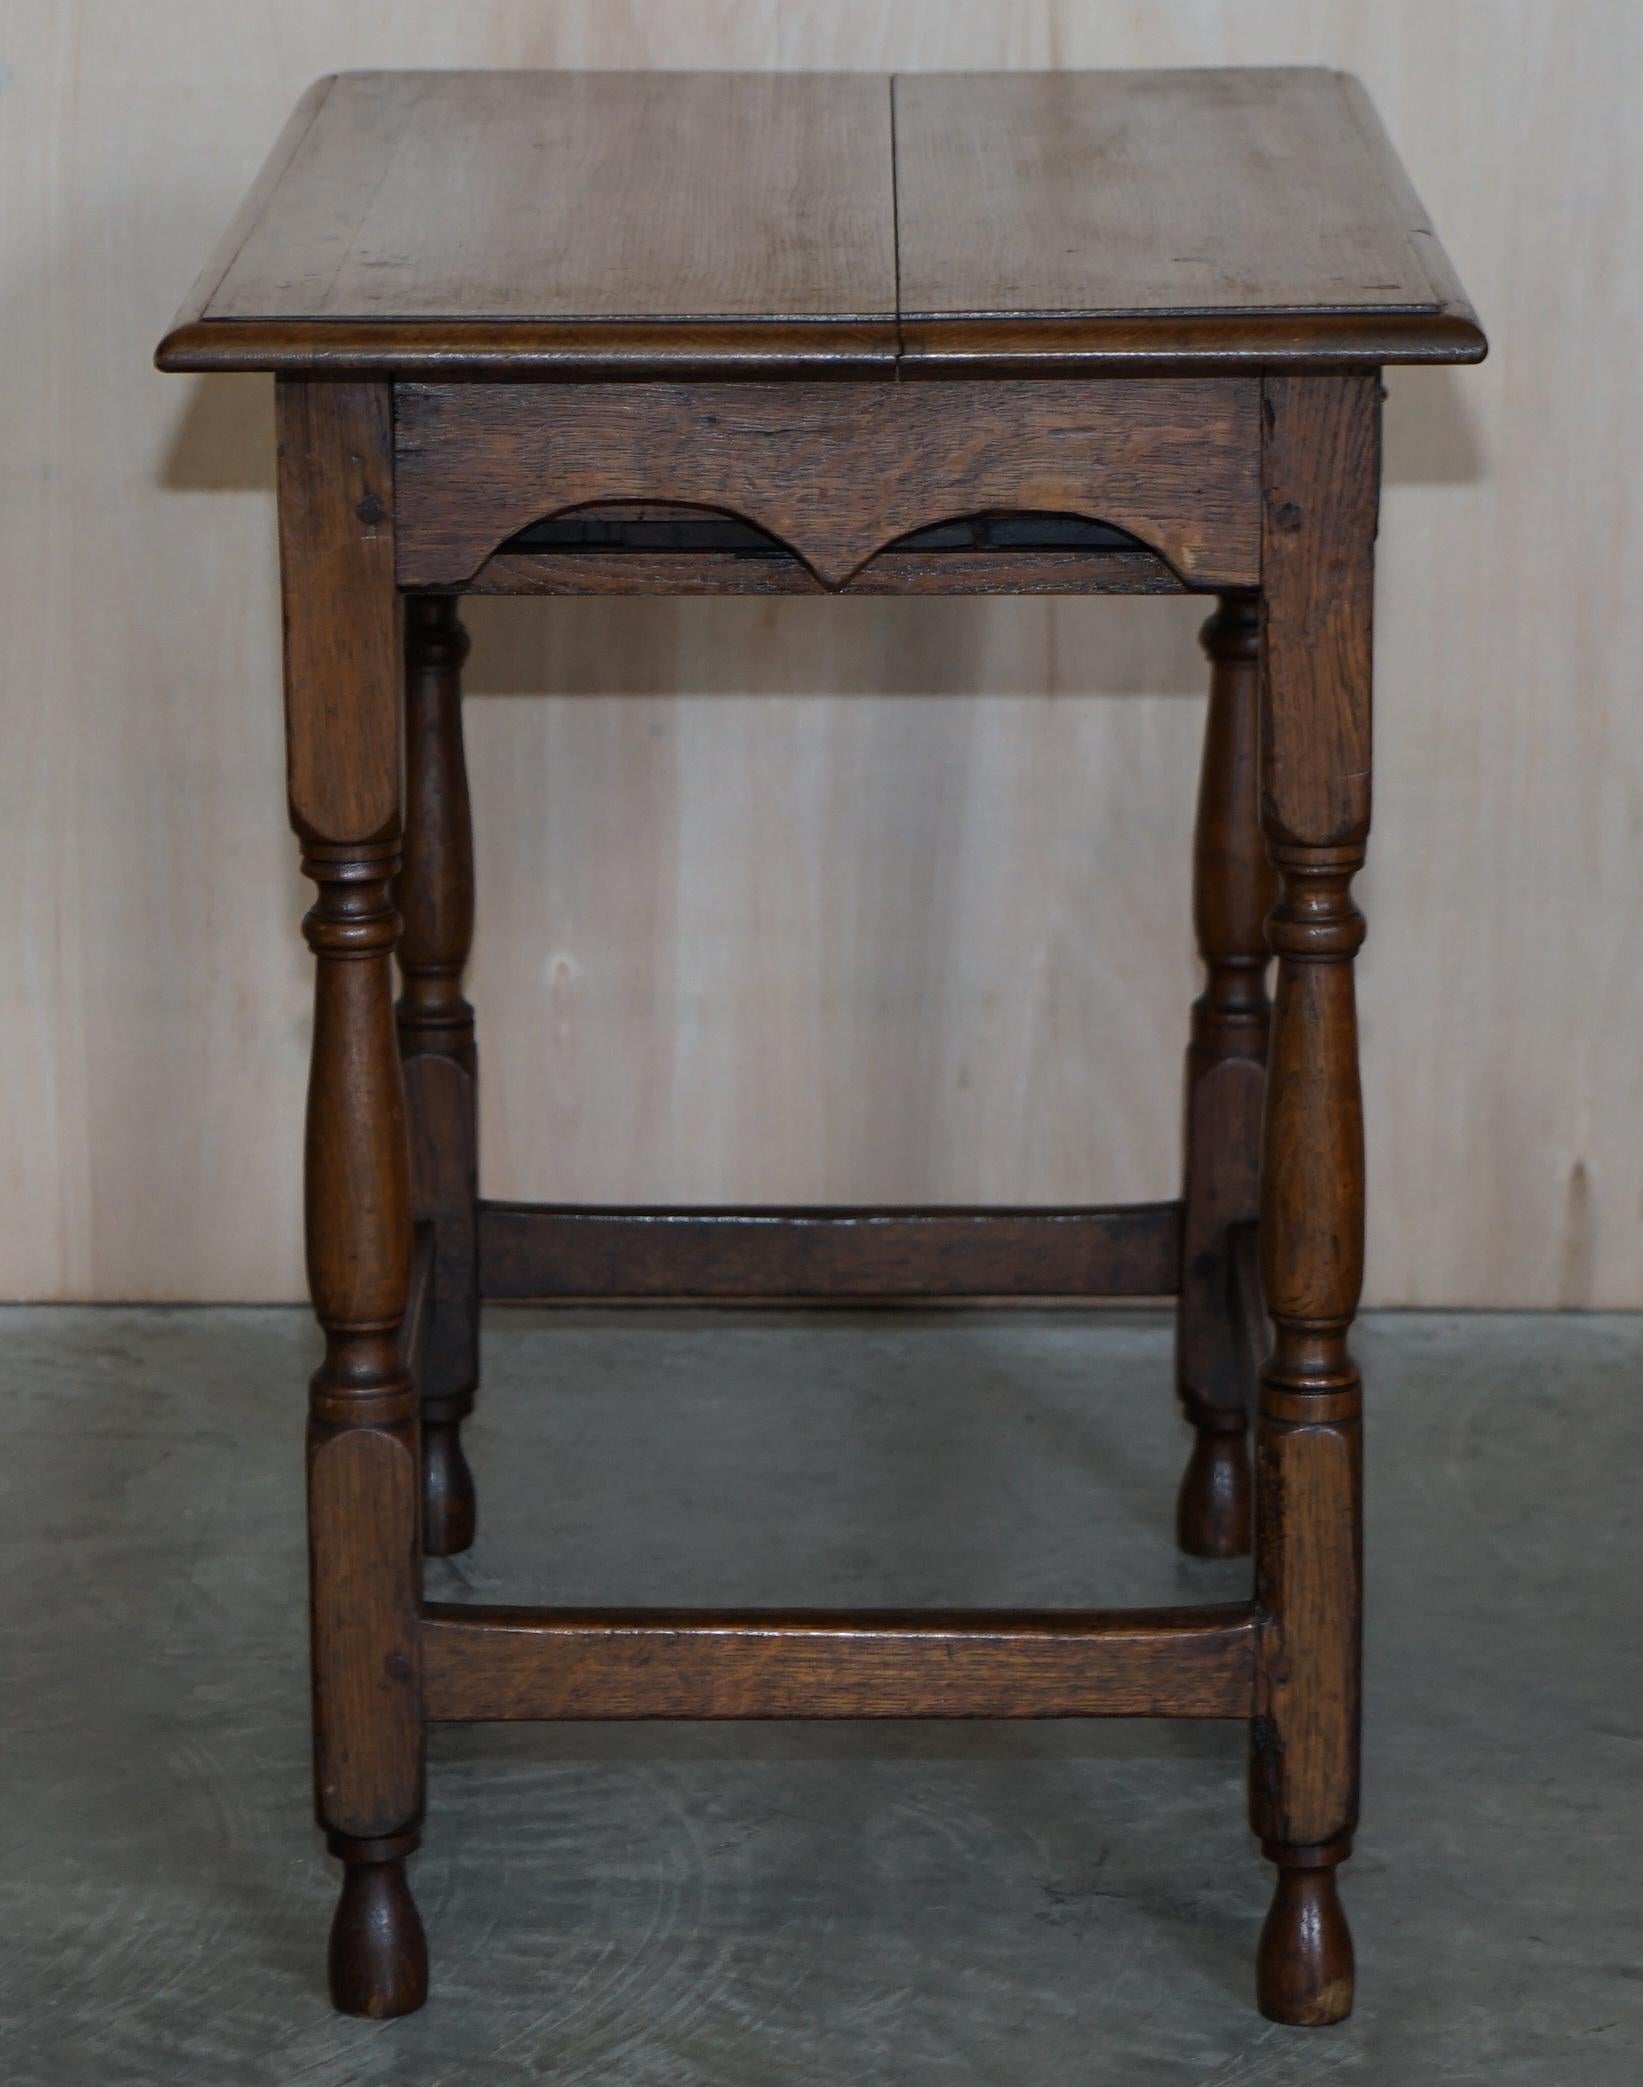 Antique circa 1700 English Oak Jointed Lowboy Side Table with Single Drawer For Sale 6